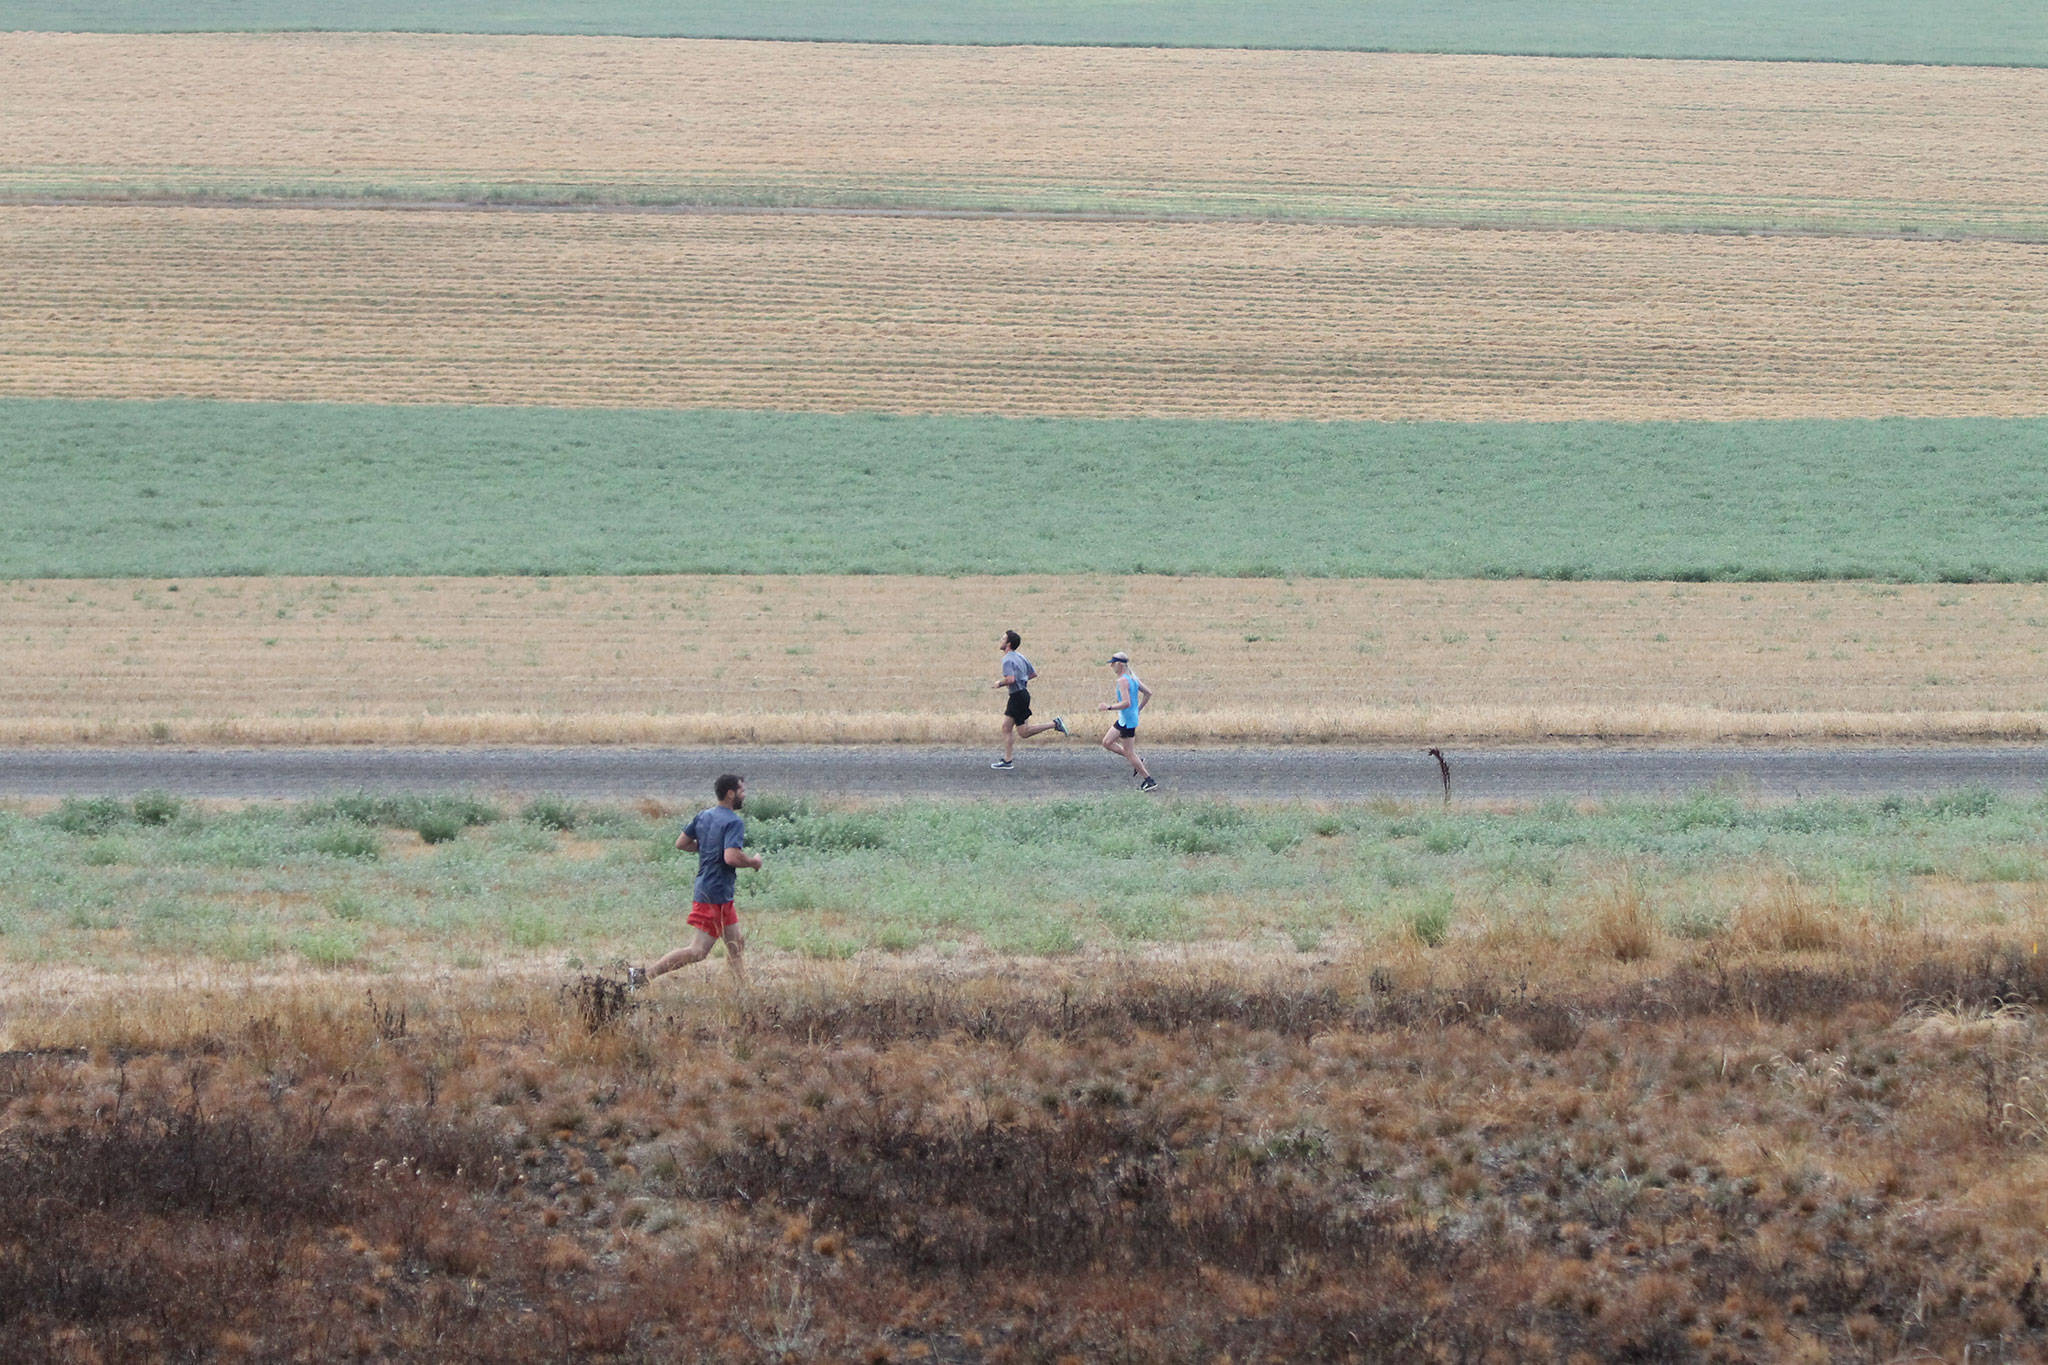 Runners jog through the prairie during Saturday’s Race the Reserve. (Photos by Jim Waller/Whidbey News-Times)